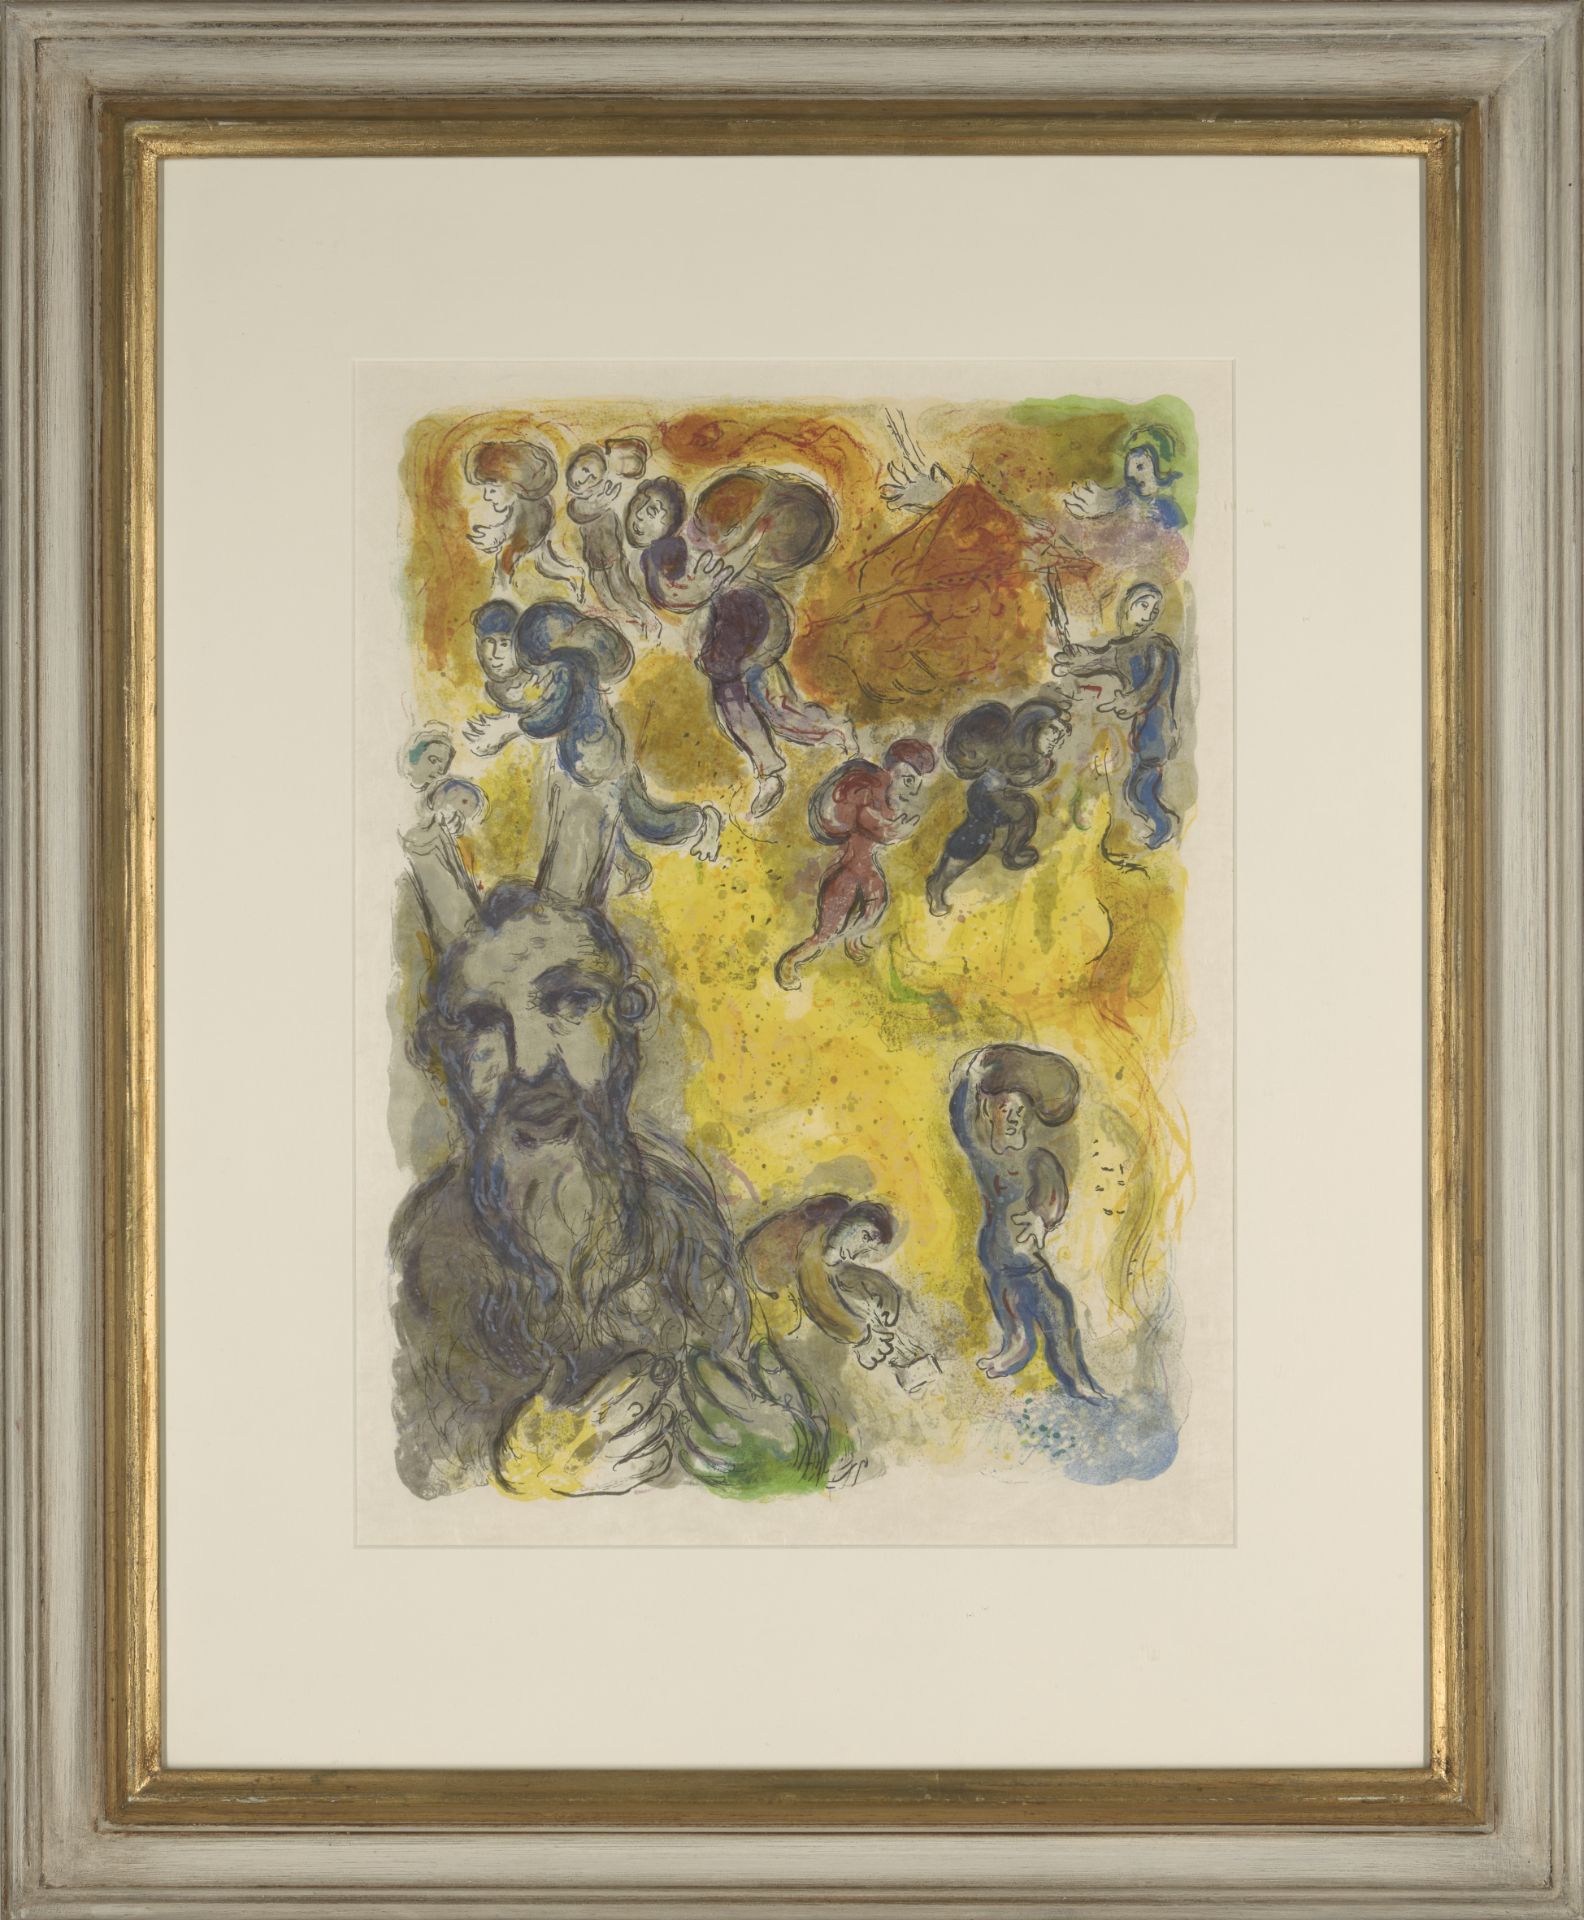 Marc Chagall, French/Russian 1887-1985, From The Story of the Exodus' Suite, 1966; lithograph i... - Image 4 of 4